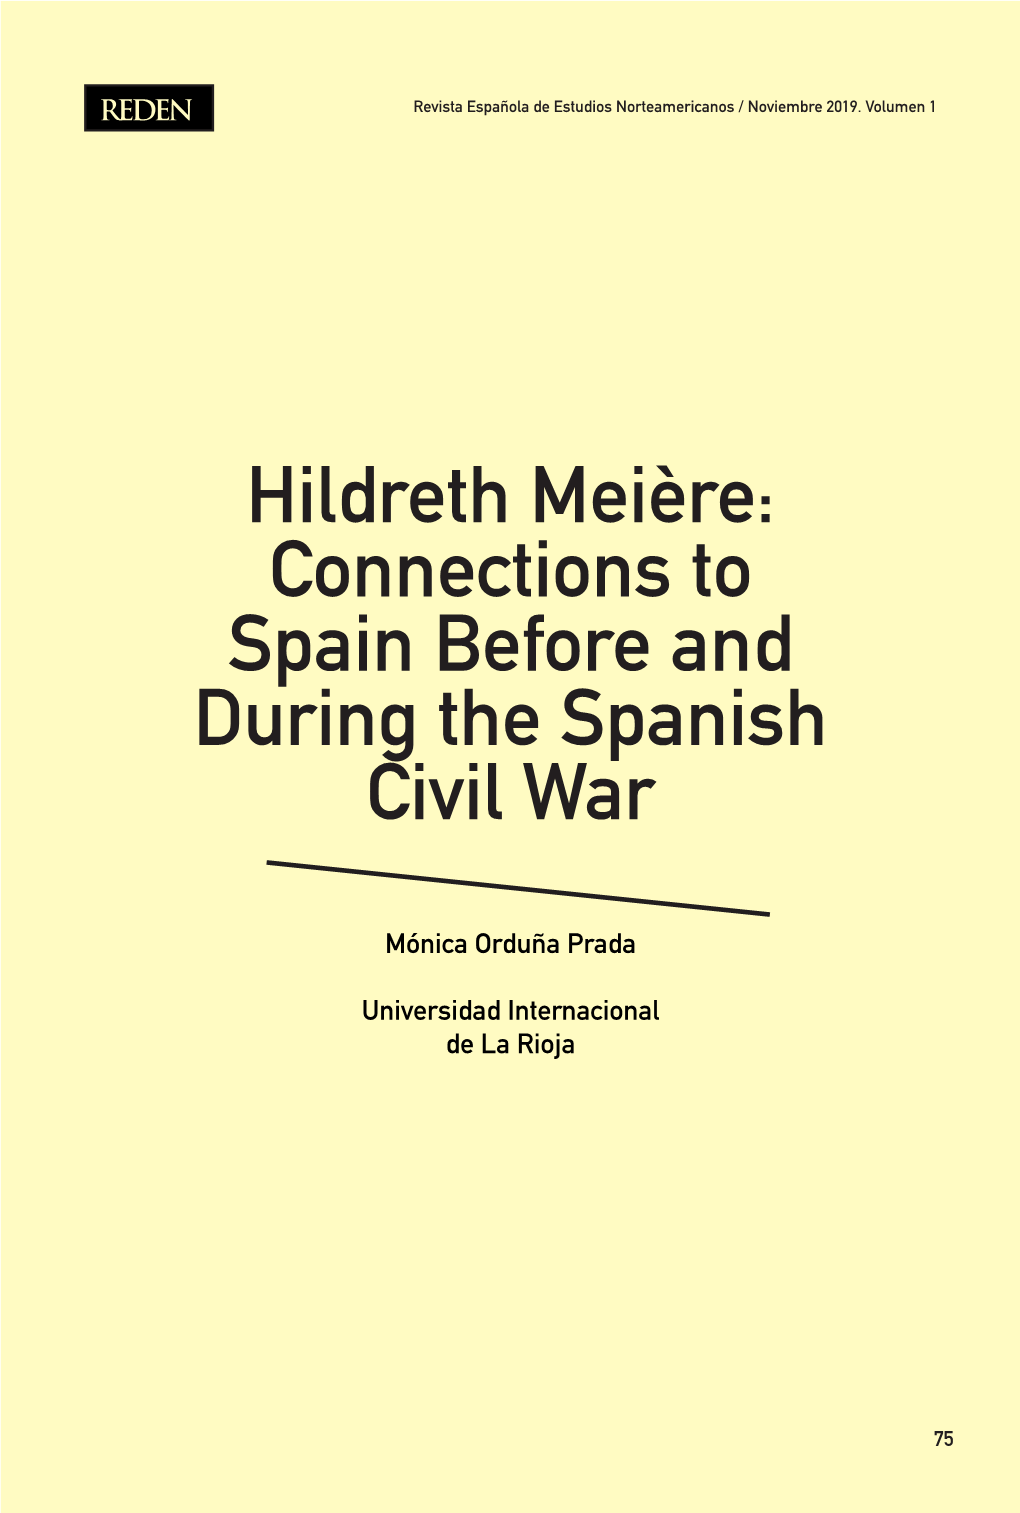 Hildreth Meière: Connections to Spain Before and During the Spanish Civil War